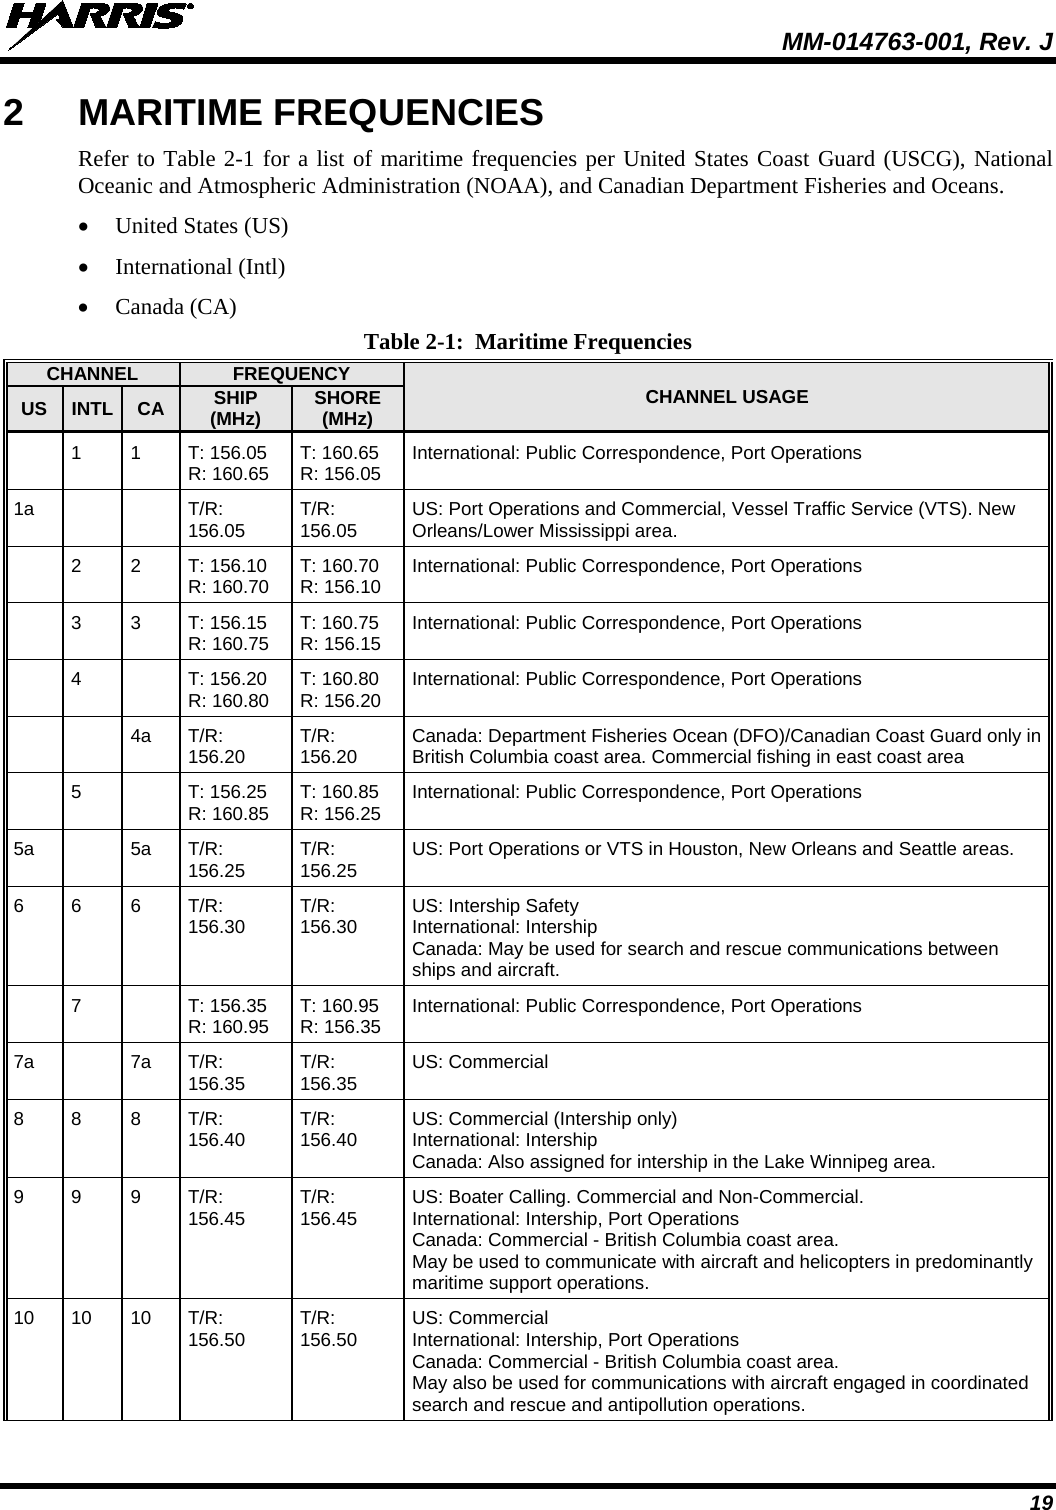  MM-014763-001, Rev. J 19 2  MARITIME FREQUENCIES Refer to Table 2-1 for a list of maritime frequencies per United States Coast Guard (USCG), National Oceanic and Atmospheric Administration (NOAA), and Canadian Department Fisheries and Oceans. • United States (US) • International (Intl) • Canada (CA) Table 2-1:  Maritime Frequencies CHANNEL FREQUENCY CHANNEL USAGE US INTL CA SHIP (MHz) SHORE (MHz)   1  1  T: 156.05 R: 160.65 T: 160.65 R: 156.05 International: Public Correspondence, Port Operations 1a      T/R: 156.05 T/R: 156.05 US: Port Operations and Commercial, Vessel Traffic Service (VTS). New Orleans/Lower Mississippi area.   2 2 T: 156.10 R: 160.70 T: 160.70  R: 156.10 International: Public Correspondence, Port Operations  3 3 T: 156.15 R: 160.75 T: 160.75 R: 156.15 International: Public Correspondence, Port Operations  4  T: 156.20  R: 160.80 T: 160.80  R: 156.20 International: Public Correspondence, Port Operations     4a T/R: 156.20 T/R: 156.20 Canada: Department Fisheries Ocean (DFO)/Canadian Coast Guard only in British Columbia coast area. Commercial fishing in east coast area   5    T: 156.25  R: 160.85 T: 160.85  R: 156.25 International: Public Correspondence, Port Operations 5a  5a T/R: 156.25 T/R: 156.25 US: Port Operations or VTS in Houston, New Orleans and Seattle areas. 6 6 6 T/R: 156.30 T/R: 156.30 US: Intership Safety International: Intership Canada: May be used for search and rescue communications between ships and aircraft.  7  T: 156.35  R: 160.95 T: 160.95  R: 156.35 International: Public Correspondence, Port Operations 7a  7a T/R: 156.35 T/R: 156.35 US: Commercial 8 8 8 T/R: 156.40 T/R: 156.40 US: Commercial (Intership only) International: Intership Canada: Also assigned for intership in the Lake Winnipeg area. 9 9 9 T/R: 156.45 T/R: 156.45 US: Boater Calling. Commercial and Non-Commercial. International: Intership, Port Operations Canada: Commercial - British Columbia coast area. May be used to communicate with aircraft and helicopters in predominantly maritime support operations. 10 10 10 T/R: 156.50 T/R: 156.50 US: Commercial  International: Intership, Port Operations Canada: Commercial - British Columbia coast area. May also be used for communications with aircraft engaged in coordinated search and rescue and antipollution operations. 